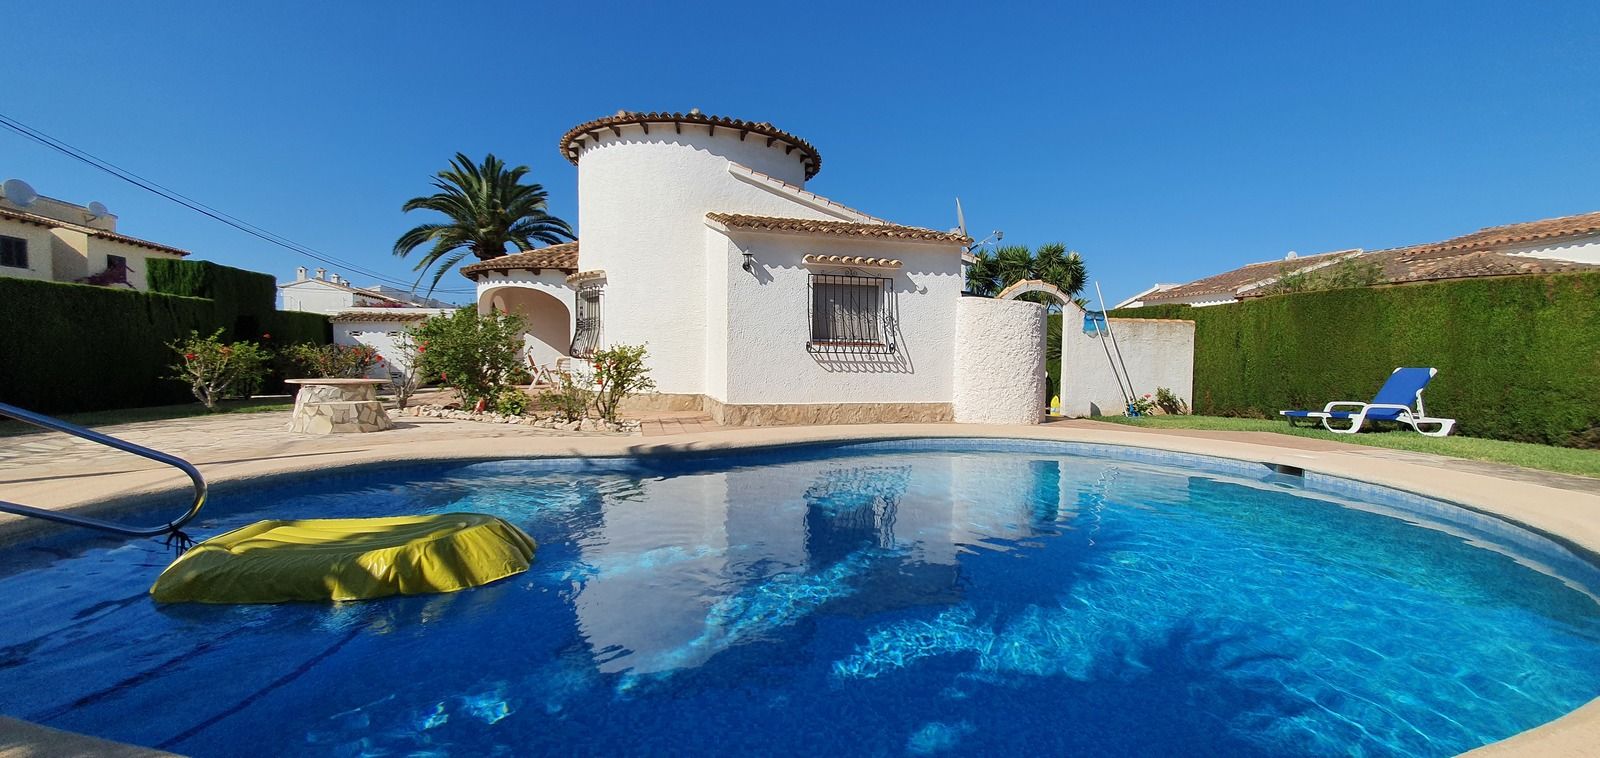 Super nice, newly renovated villa with large corner plot, large pool and winter sun.